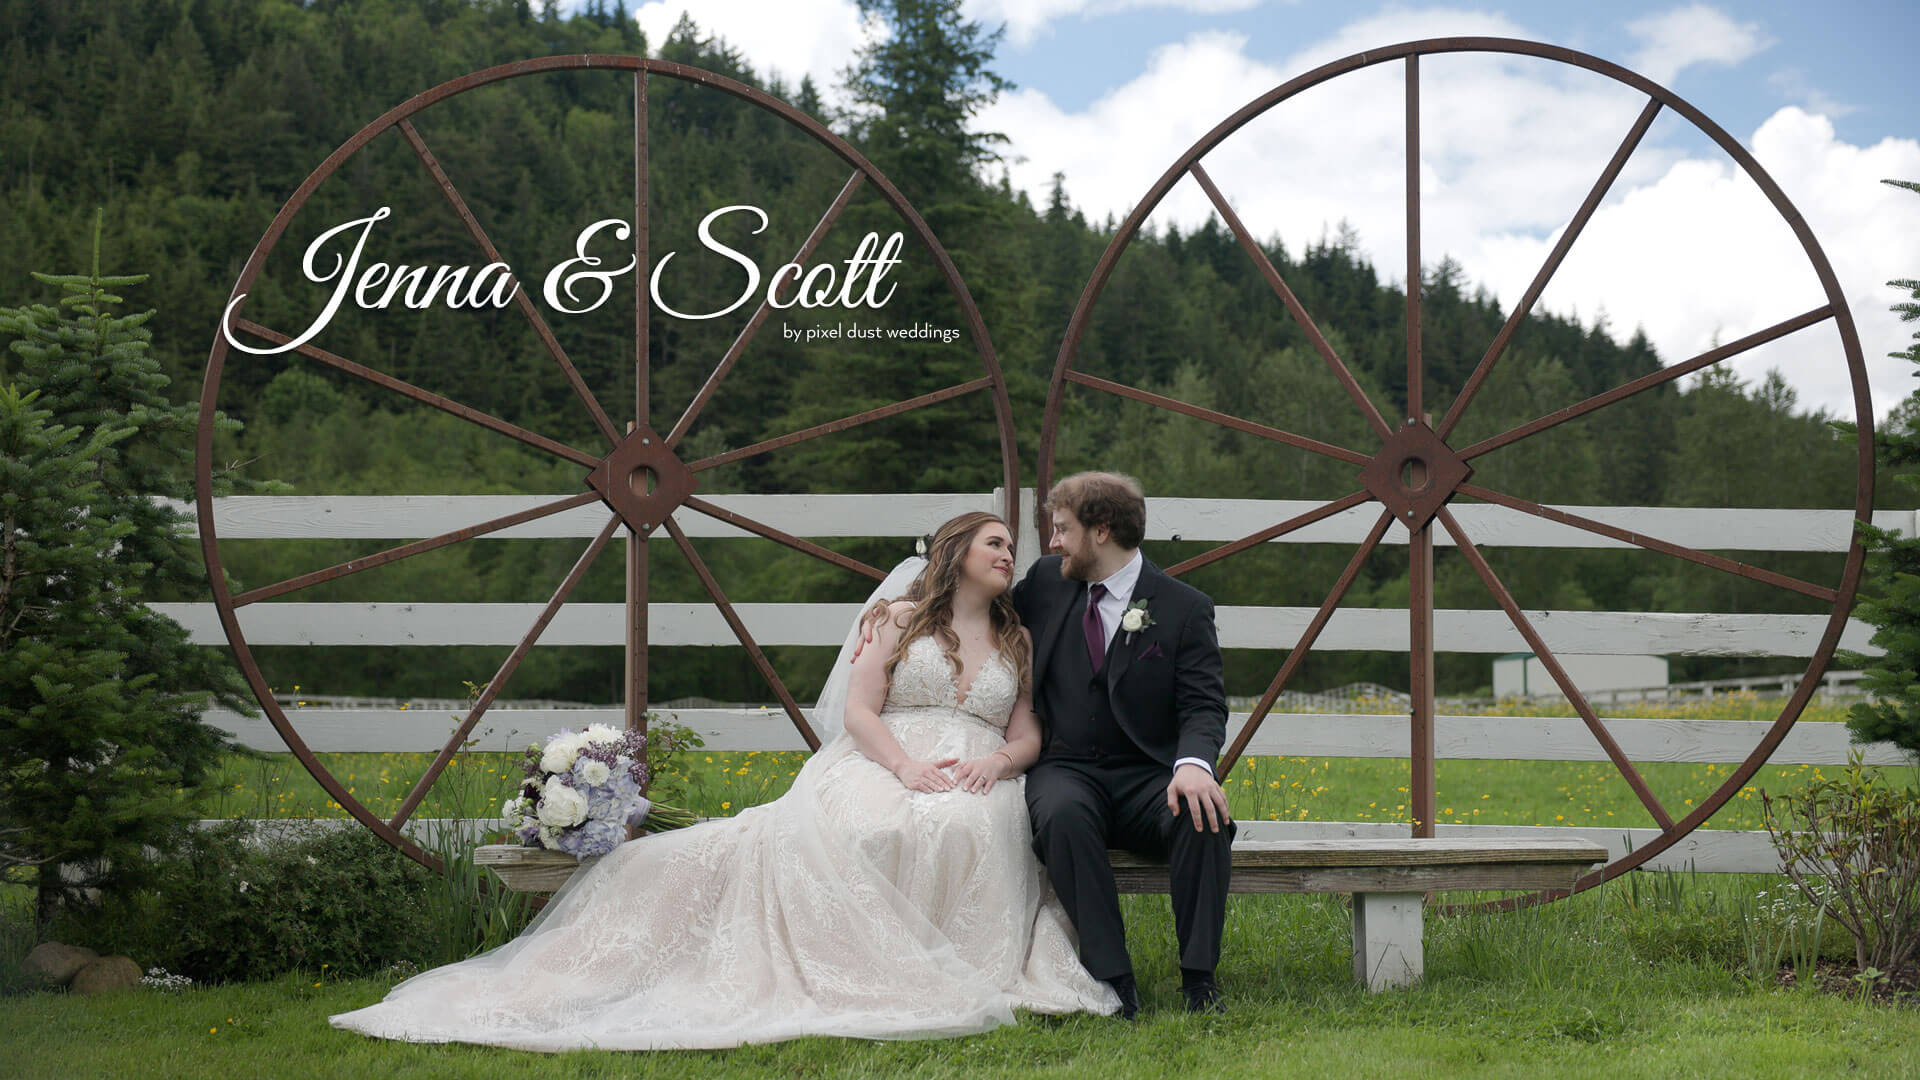 Rein Fire Ranch authentic horse drawn carriage wedding in Ravensdale, WA